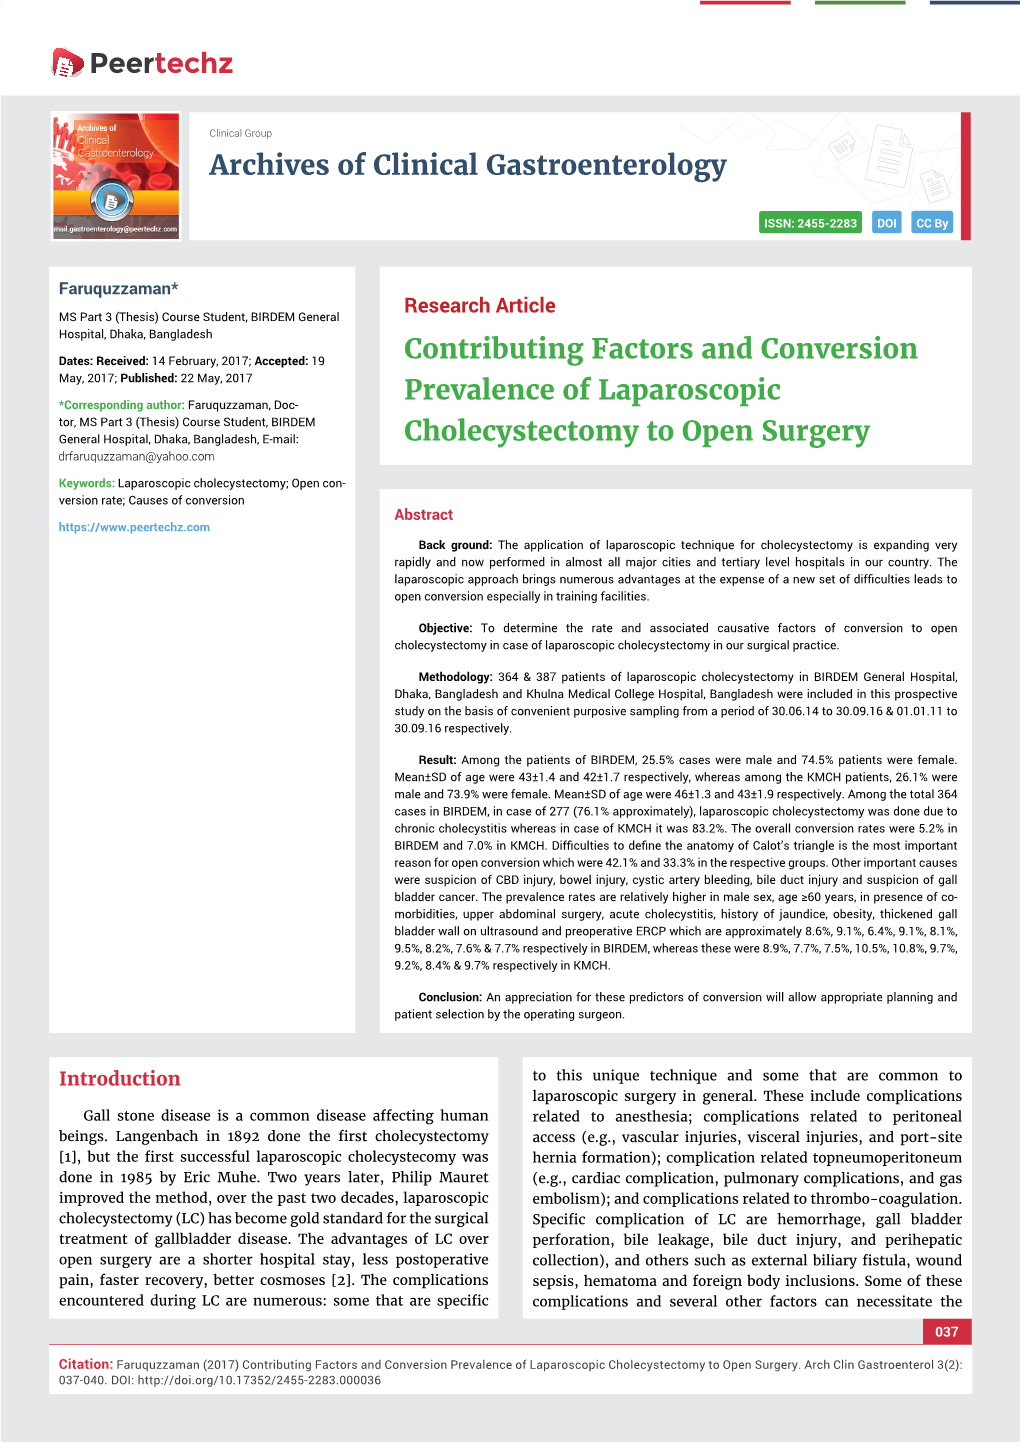 Contributing Factors and Conversion Prevalence of Laparoscopic Cholecystectomy to Open Surgery